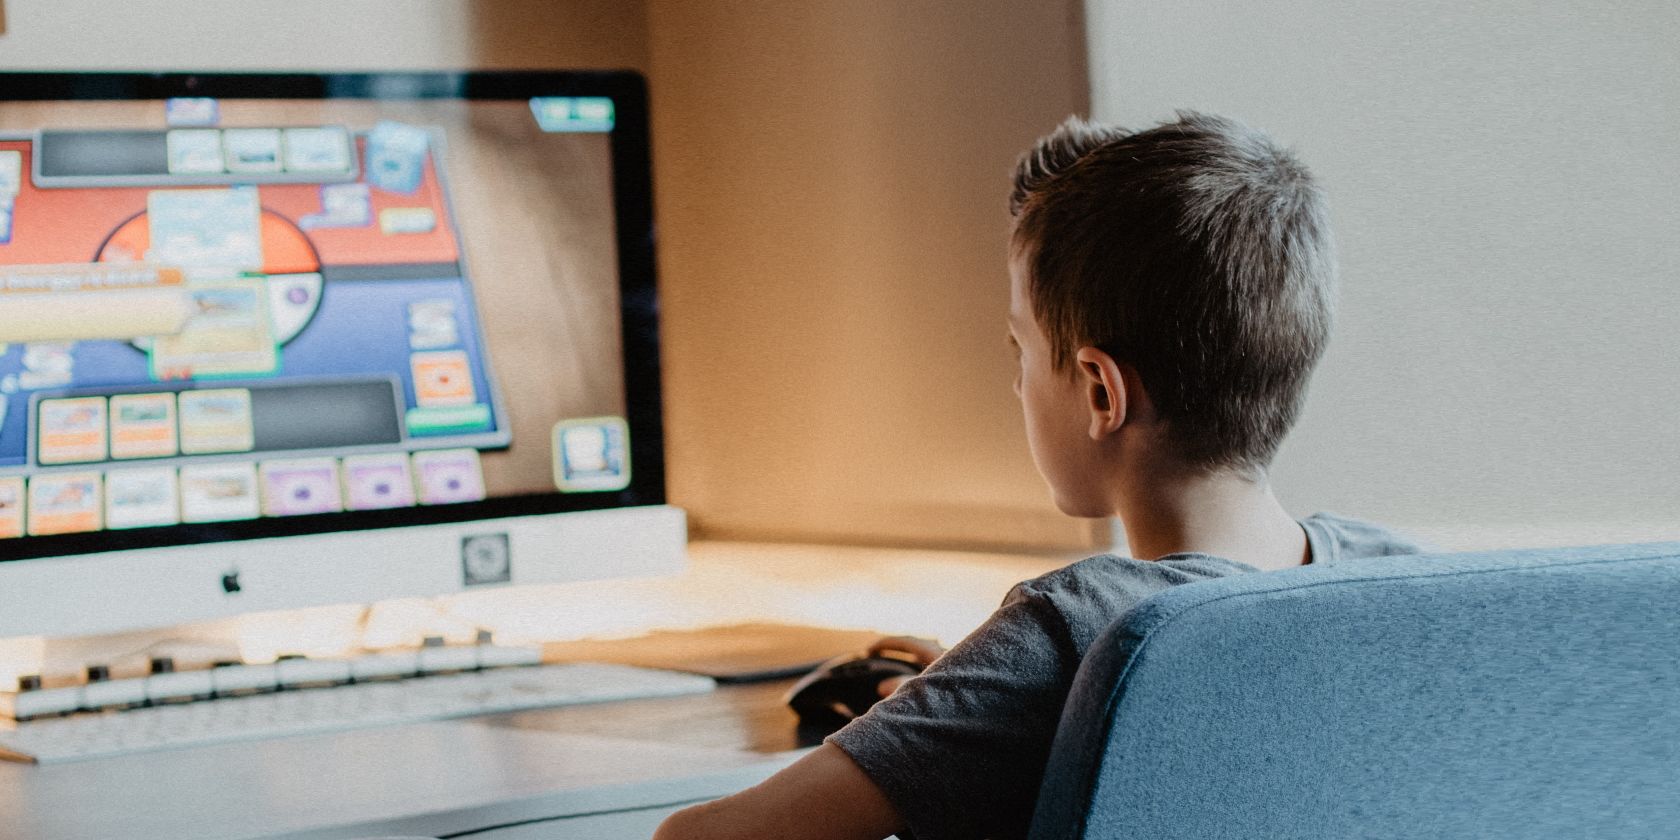 Child in Black Shirt Sitting in Chair Playing Video Game on Computer Photo